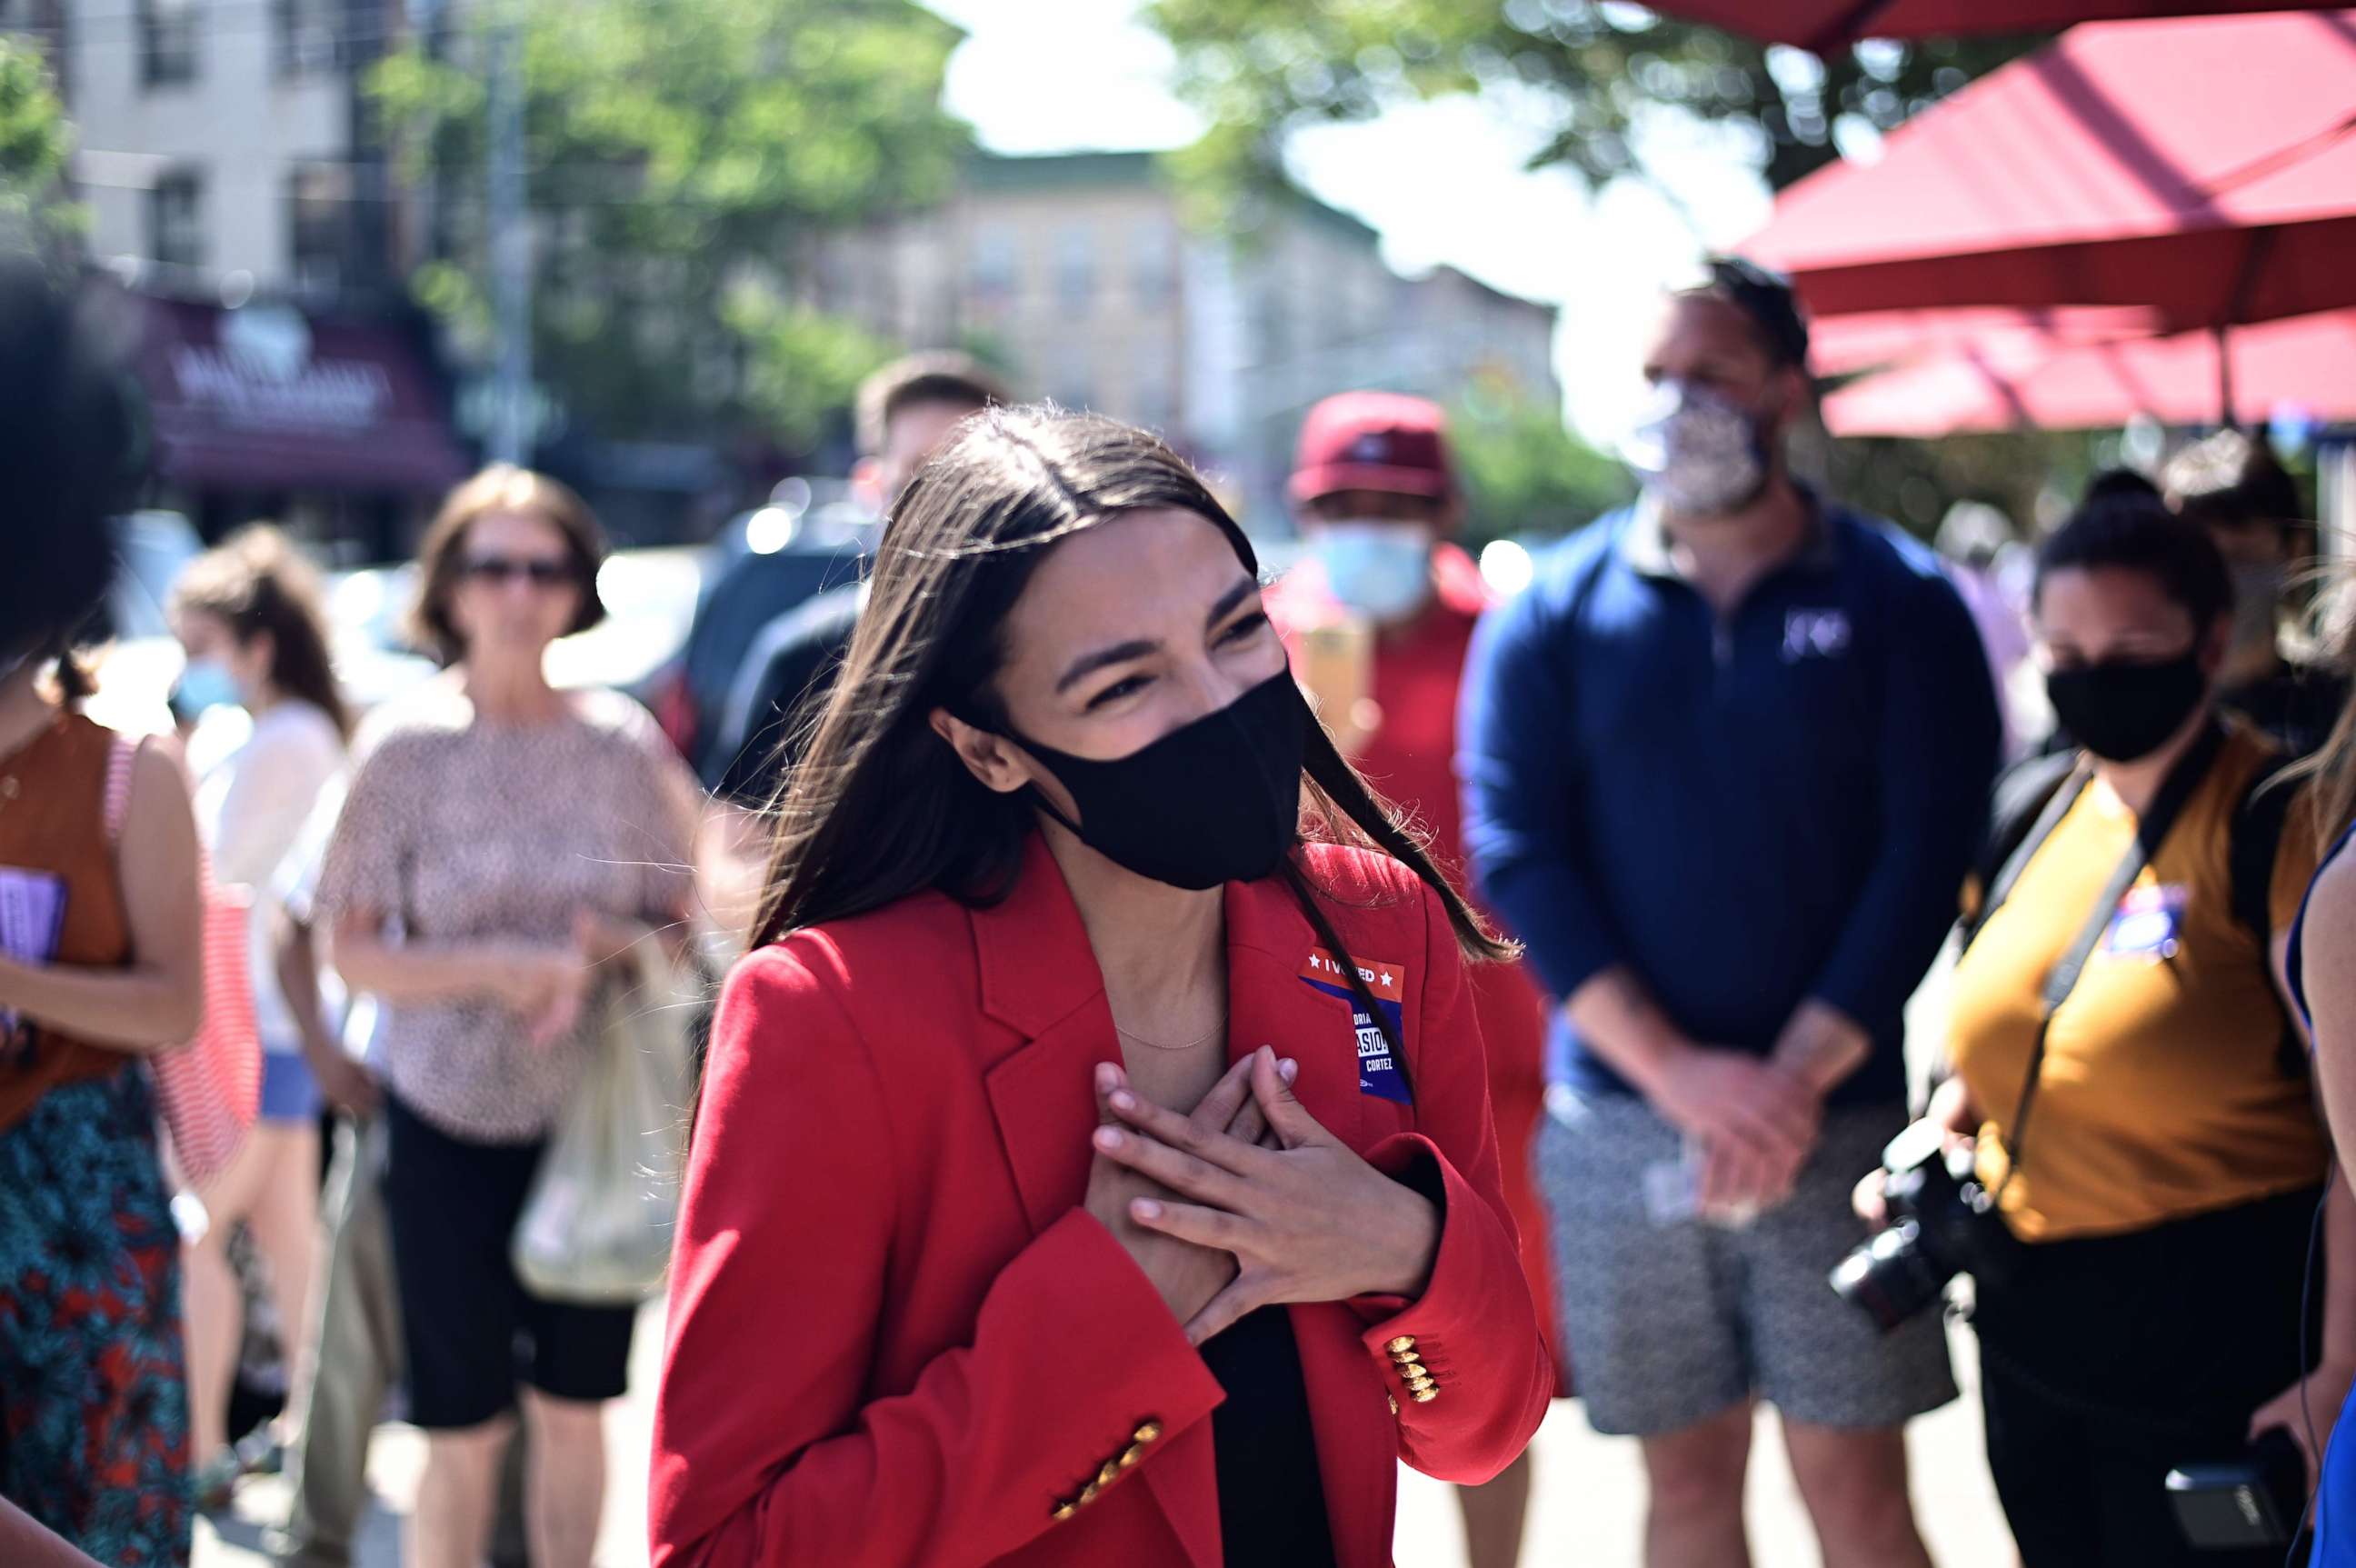 PHOTO: (FILES) In this file photo taken on June 23, 2020 US Representative Alexandria Ocasio-Cortez (D-NY), speaks with a voter near a polling station during the New York primaries Election Day  in New York City.